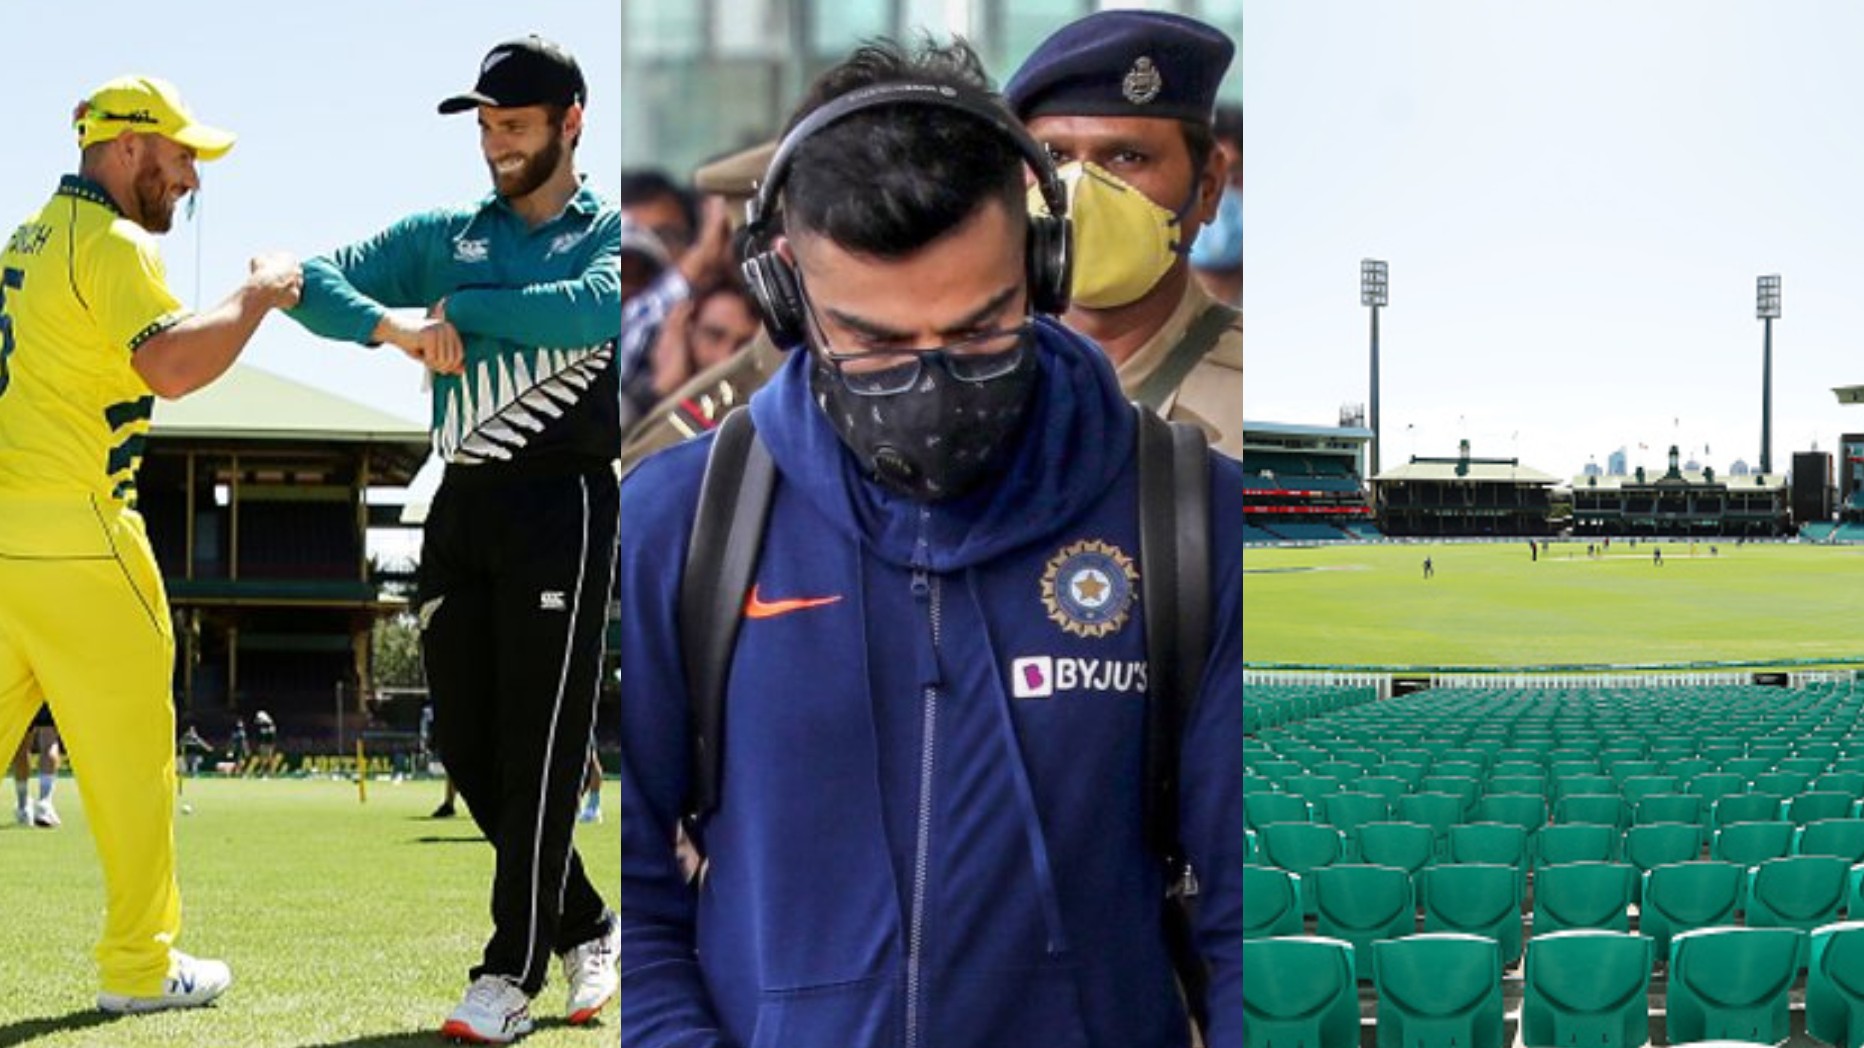 5 changes that may be brought in the game of cricket in the post-coronavirus world